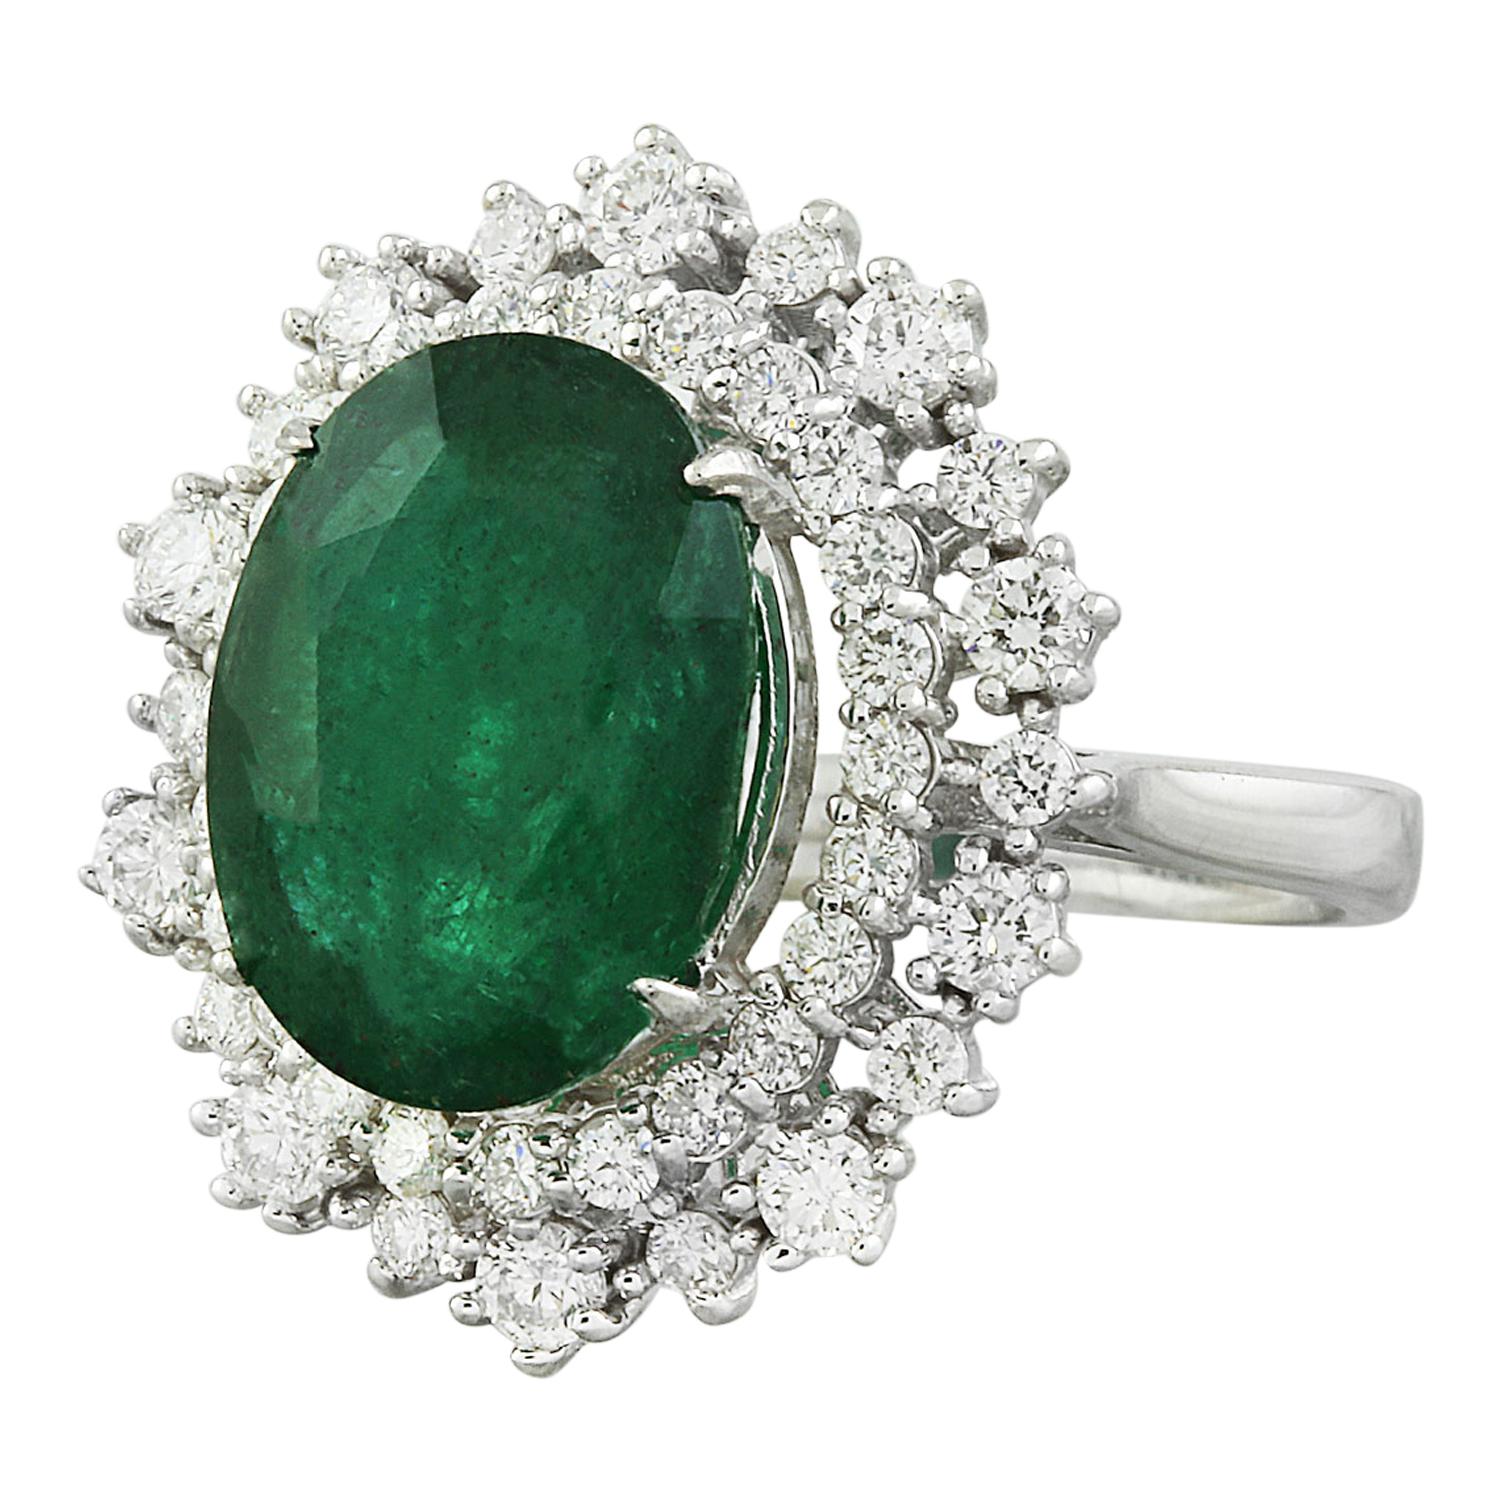 Introducing our captivating 7.15 Carat Natural Emerald 14K Solid White Gold Diamond Ring. This stunning piece features a stamped 14K white gold band, weighing a total of 6 grams. The star of the show is the breathtaking 6.00-carat emerald, measuring